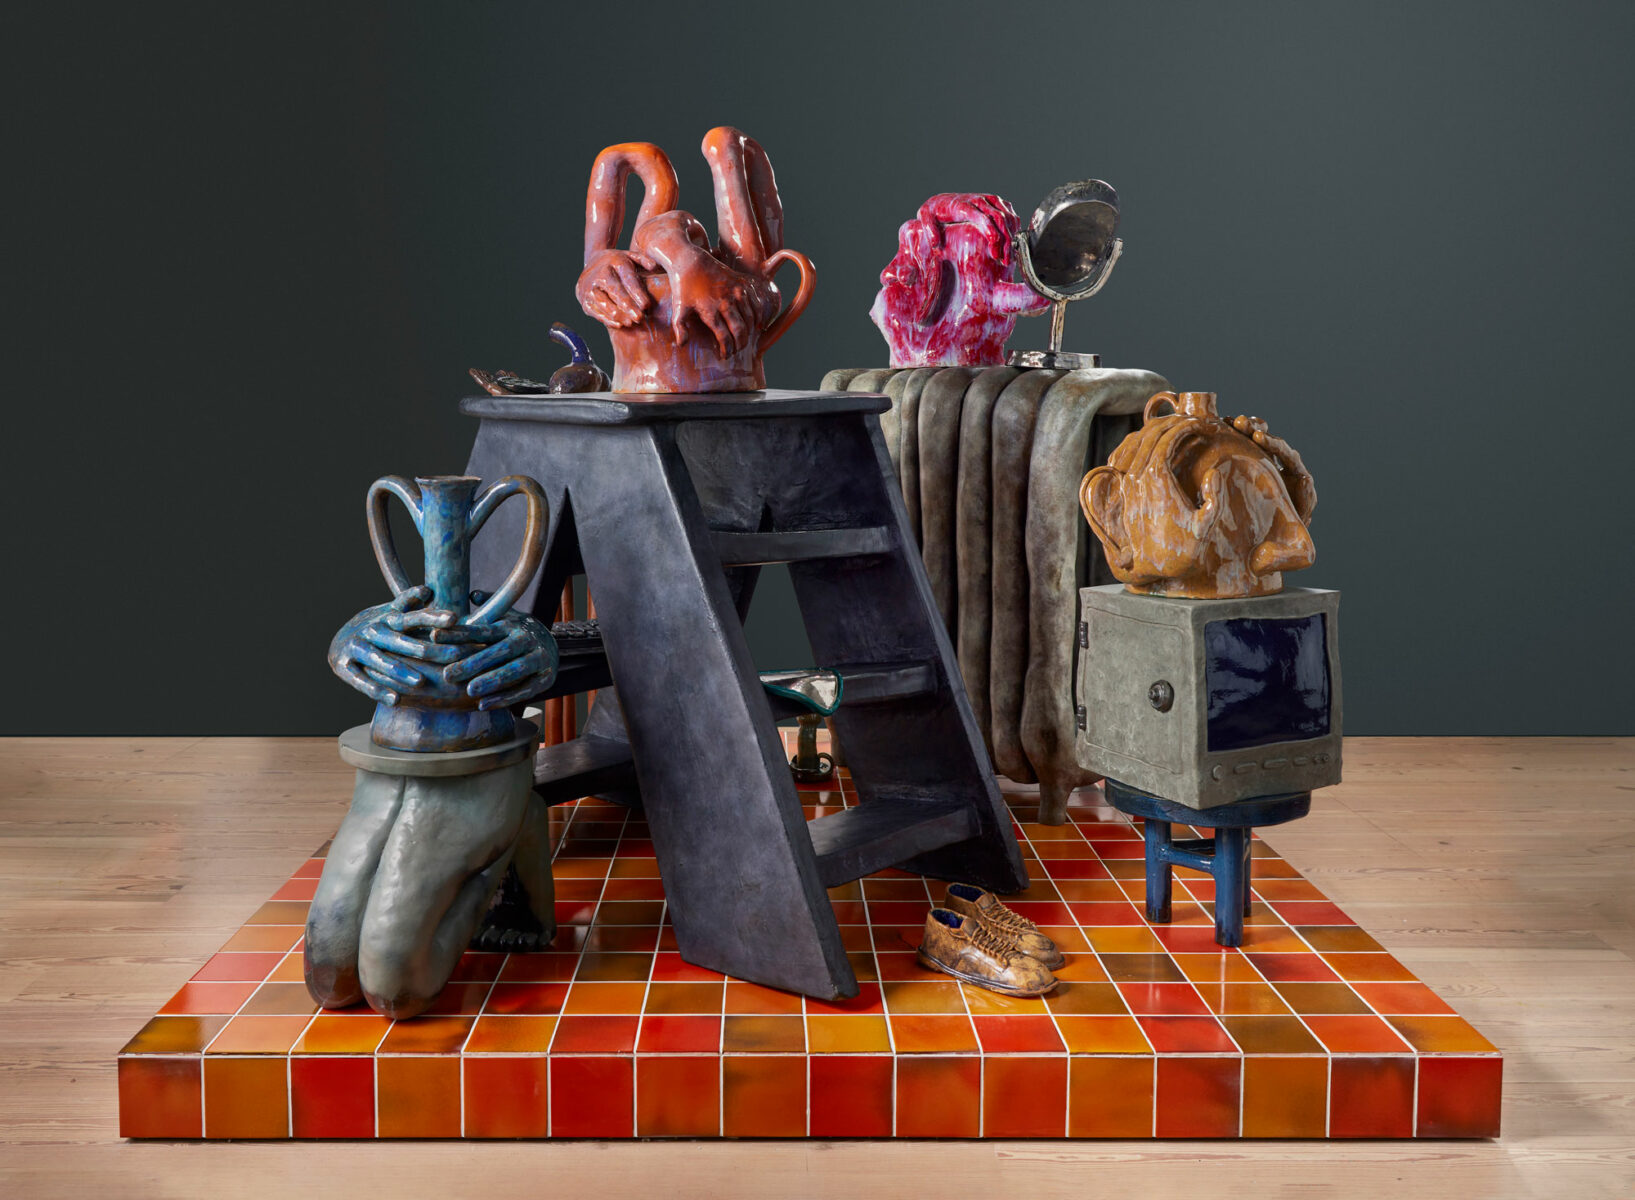 Ceramic sculpture of oversize common day objects such a TV, mirror, radiator and ladder.